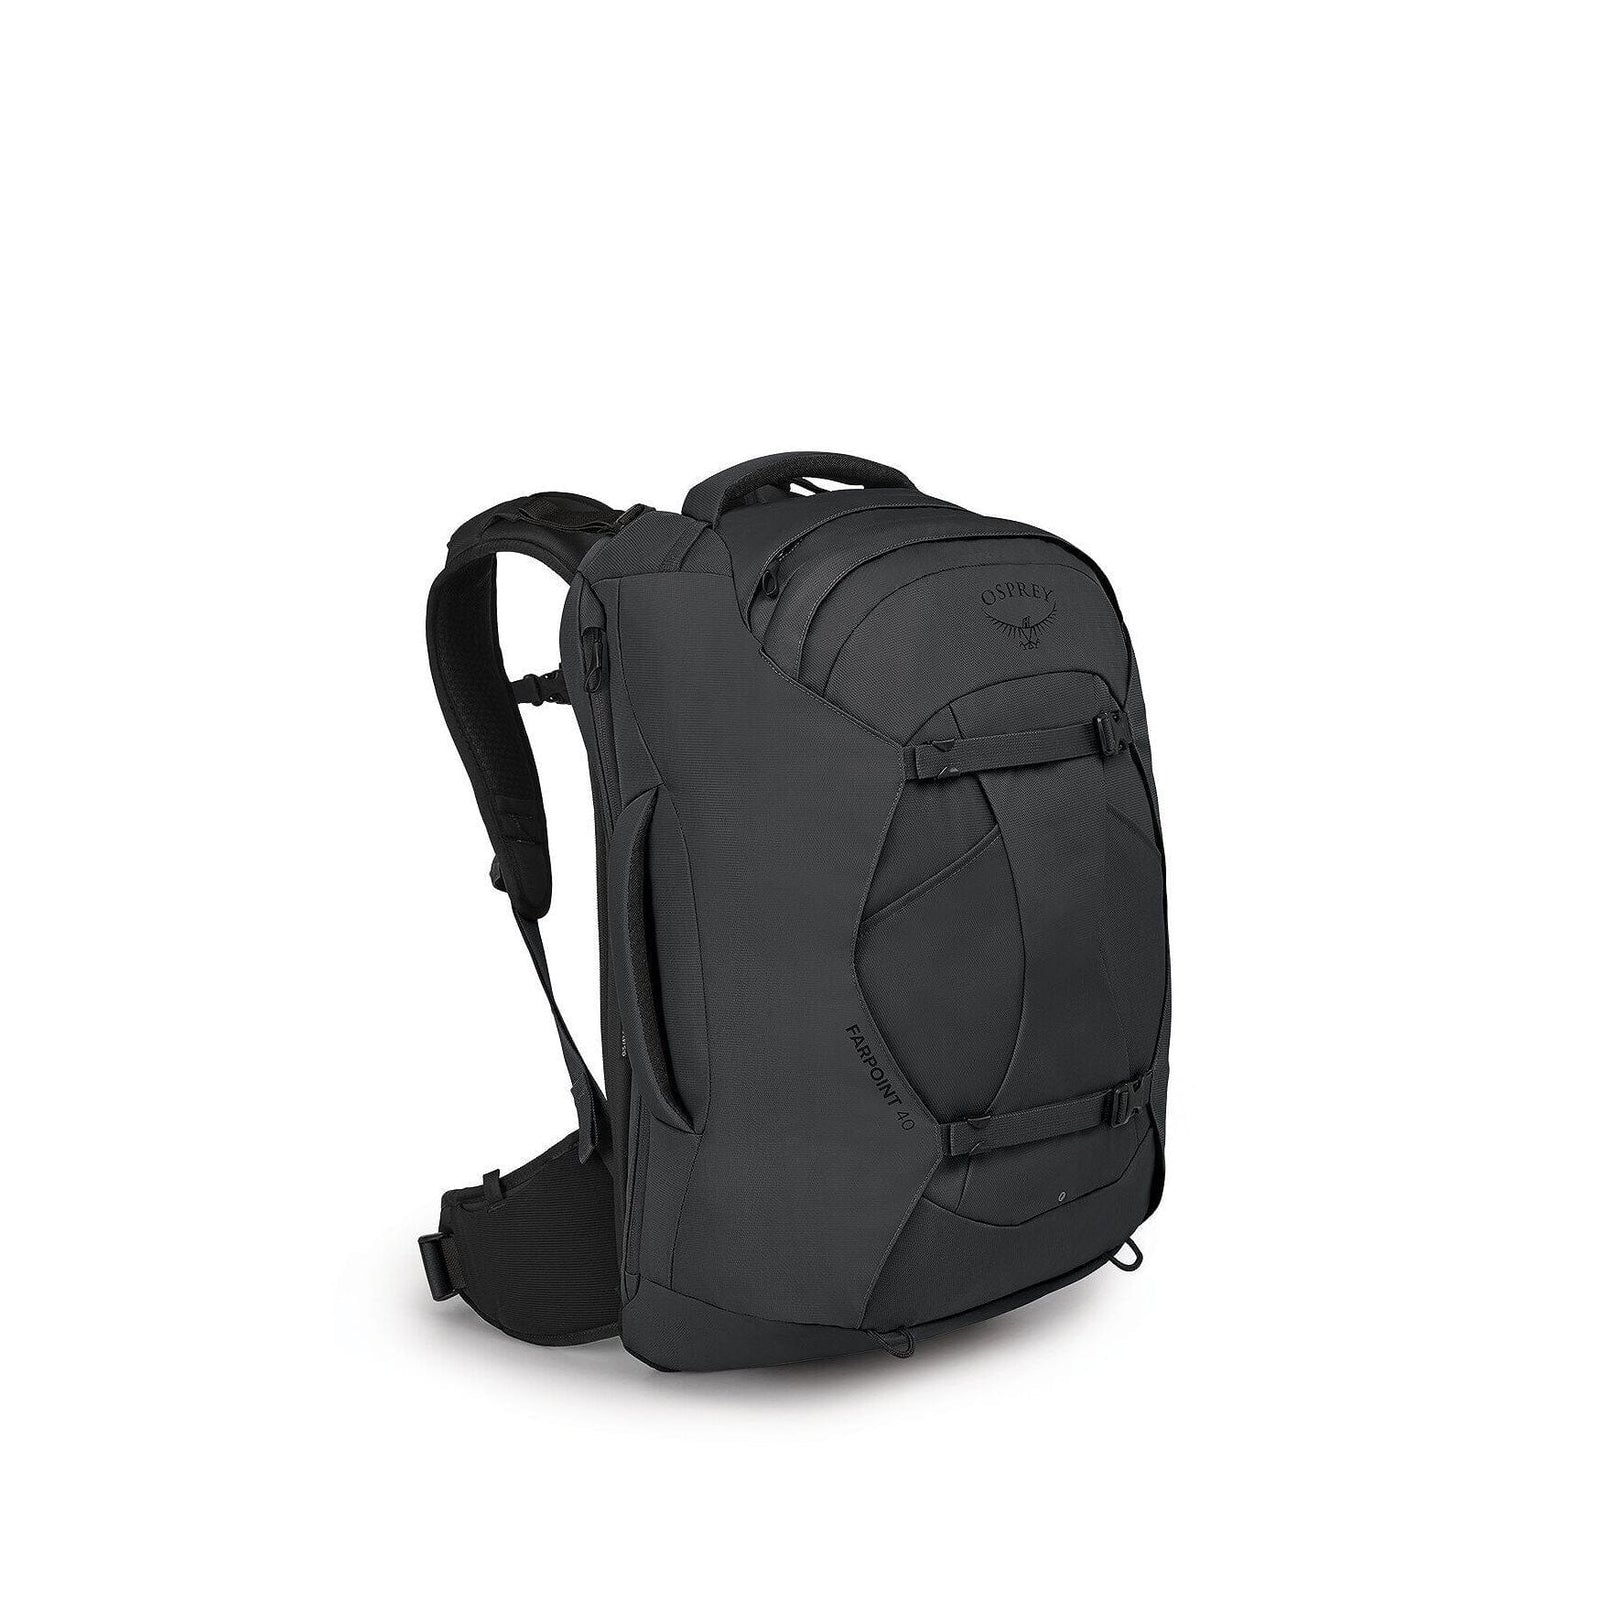 Osprey Farpoint 40 Travel Pack Tunnel Vision Grey 